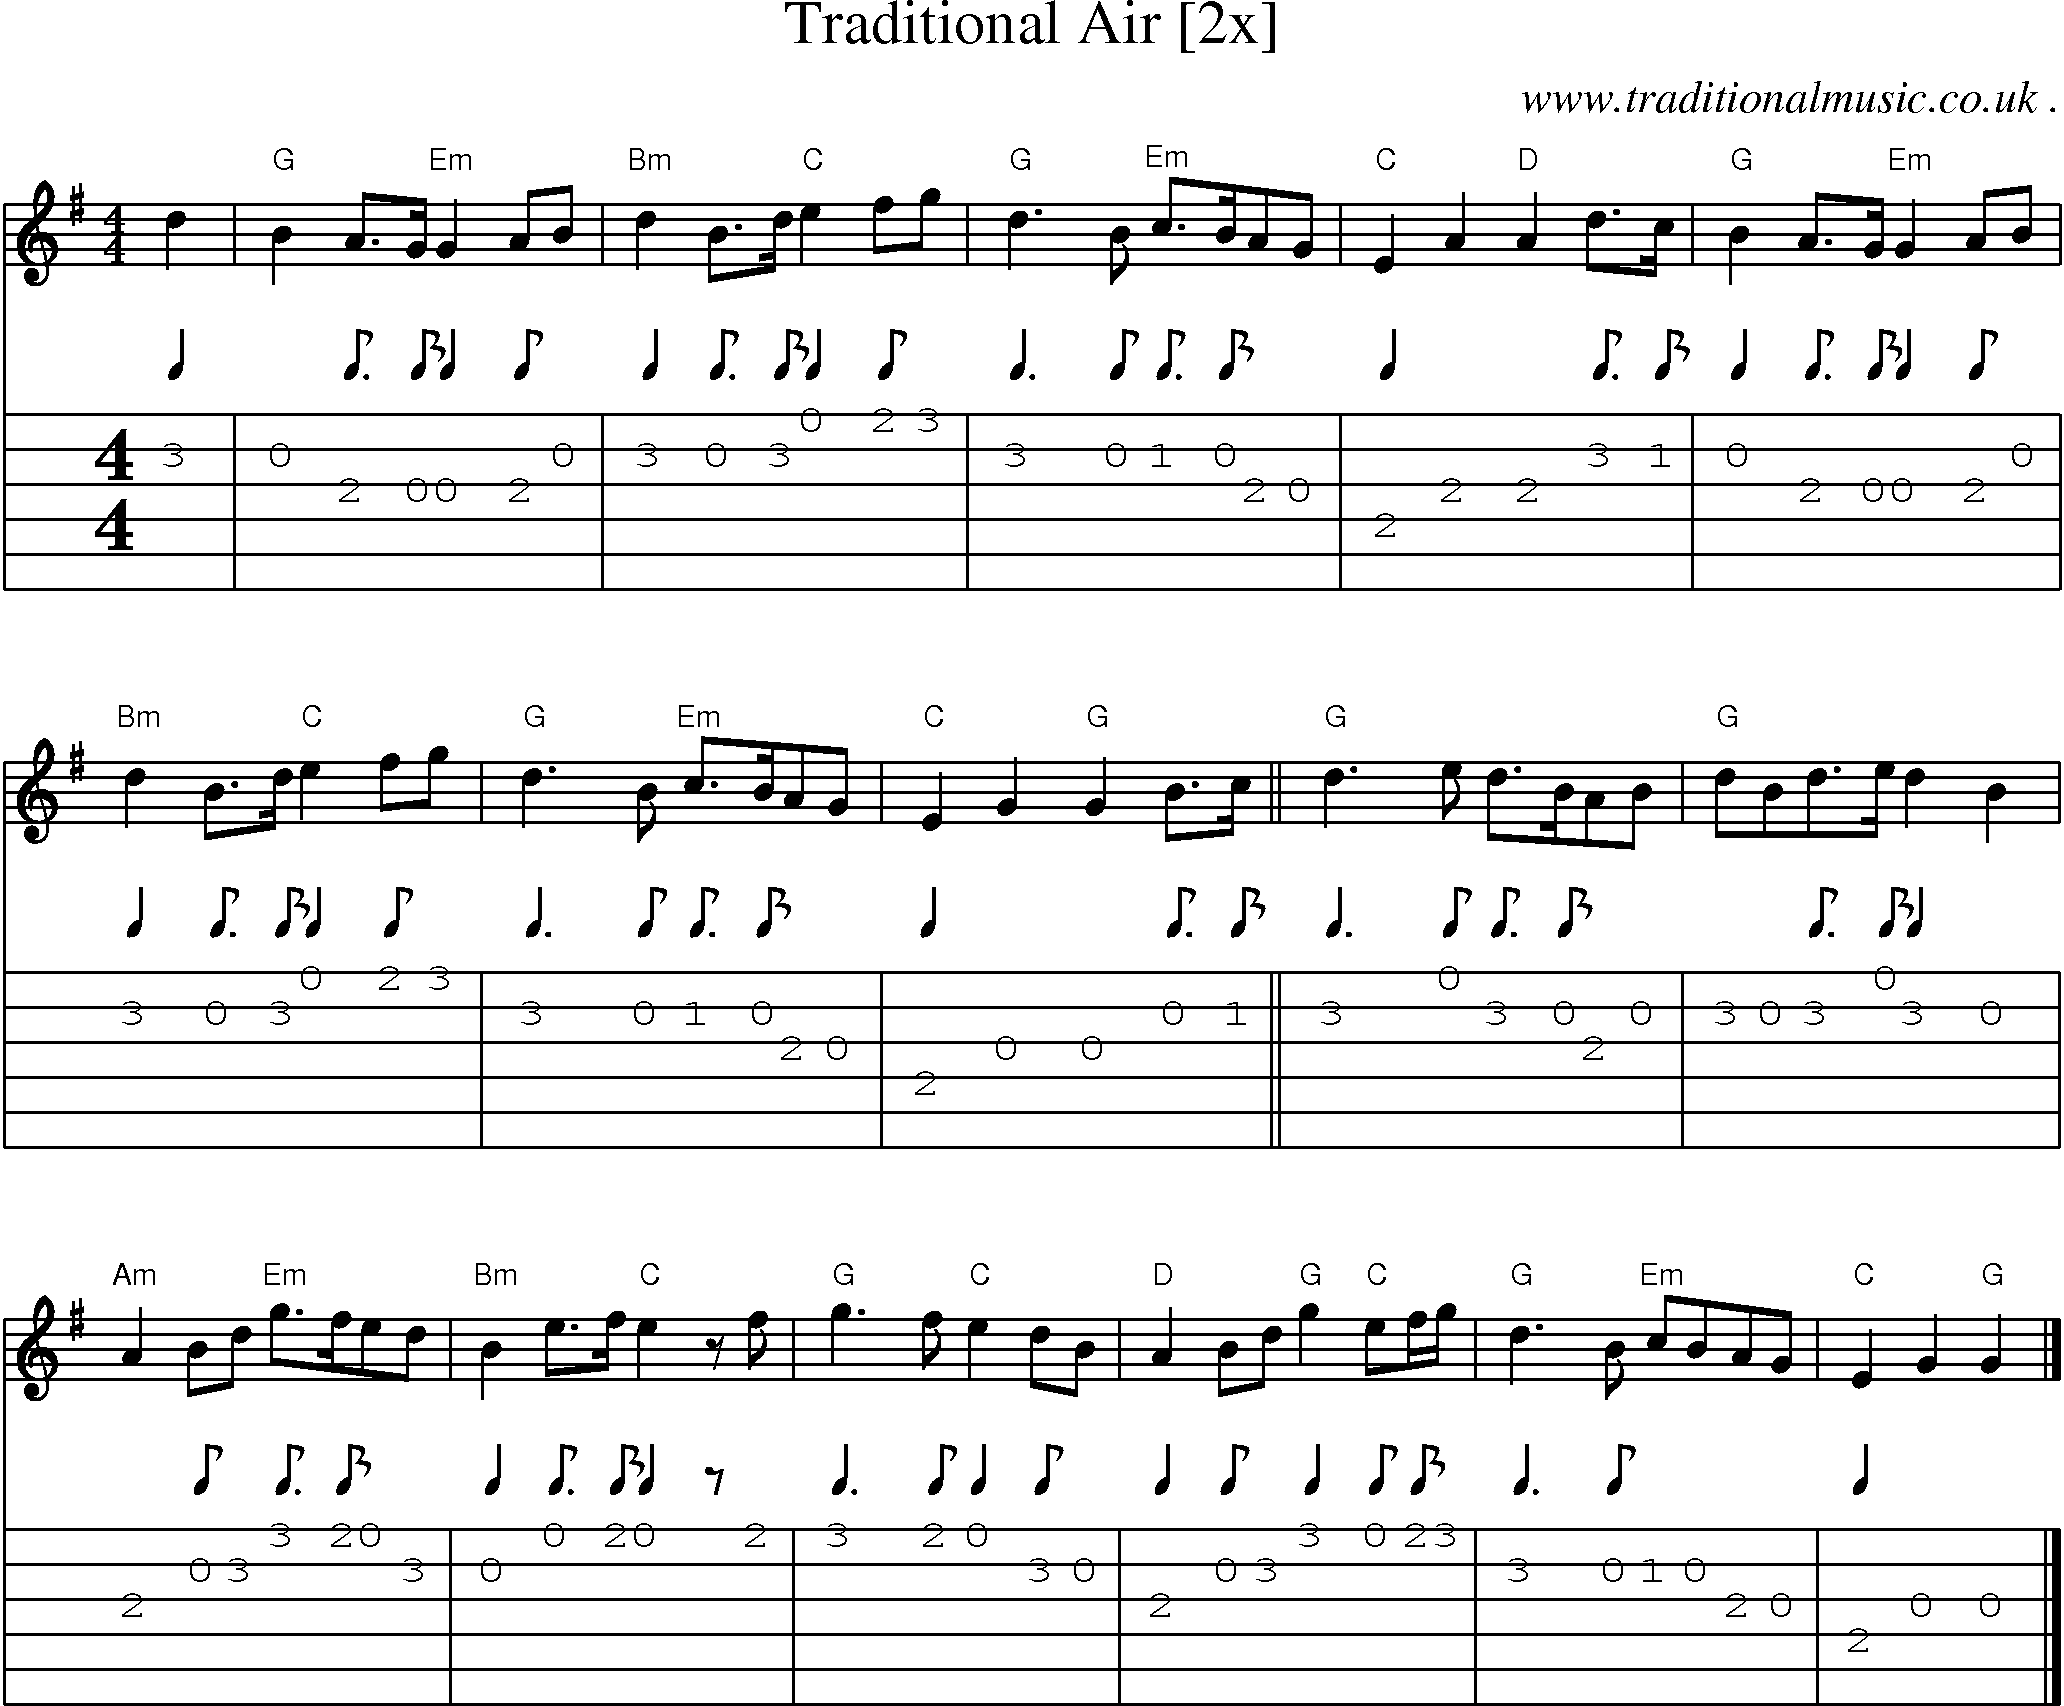 Sheet-music  score, Chords and Guitar Tabs for Traditional Air [2x]